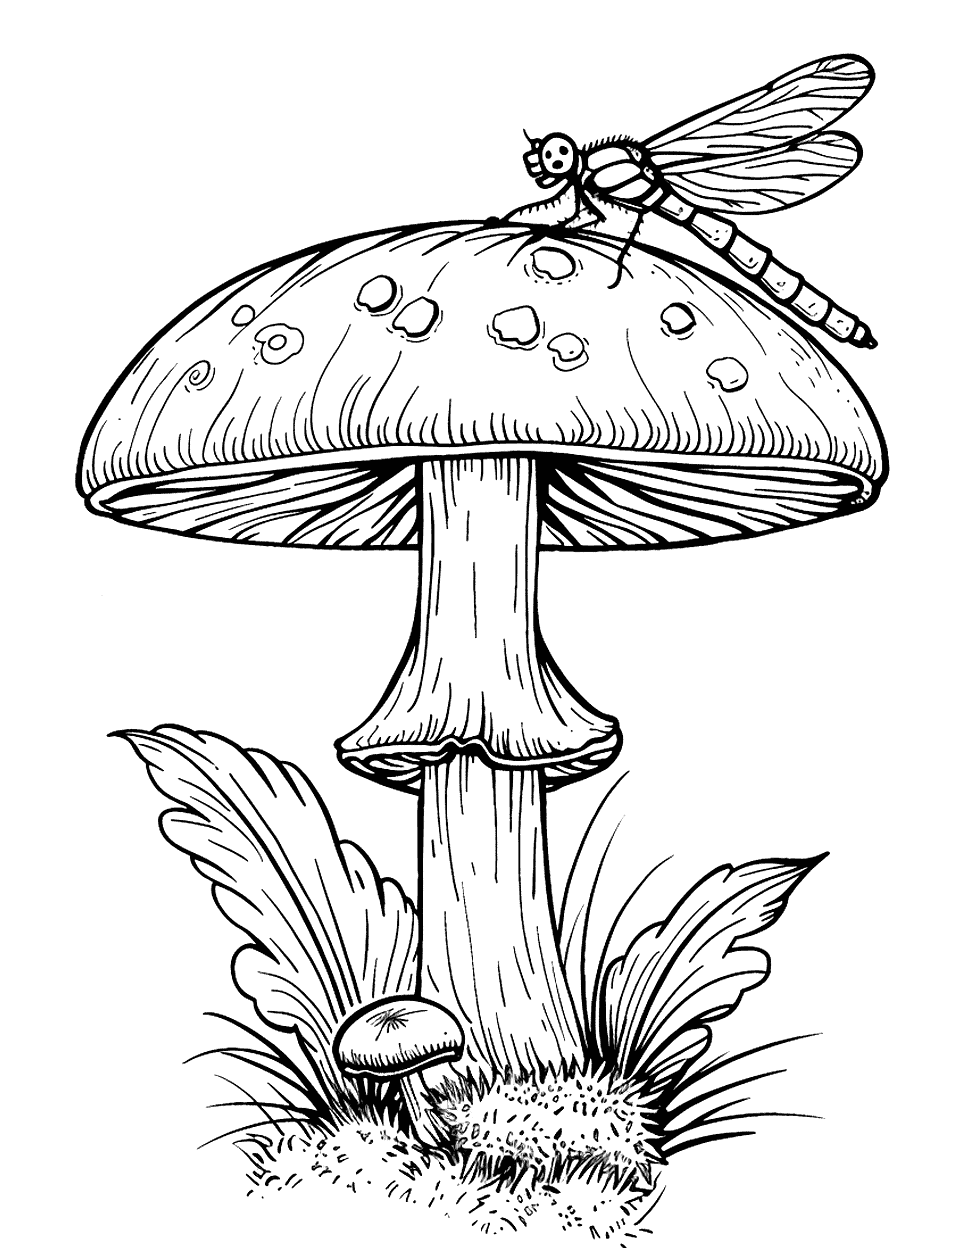 Mushroom and Dragonfly Coloring Page - A dragonfly perches on the edge of a mushroom, its wings spread.